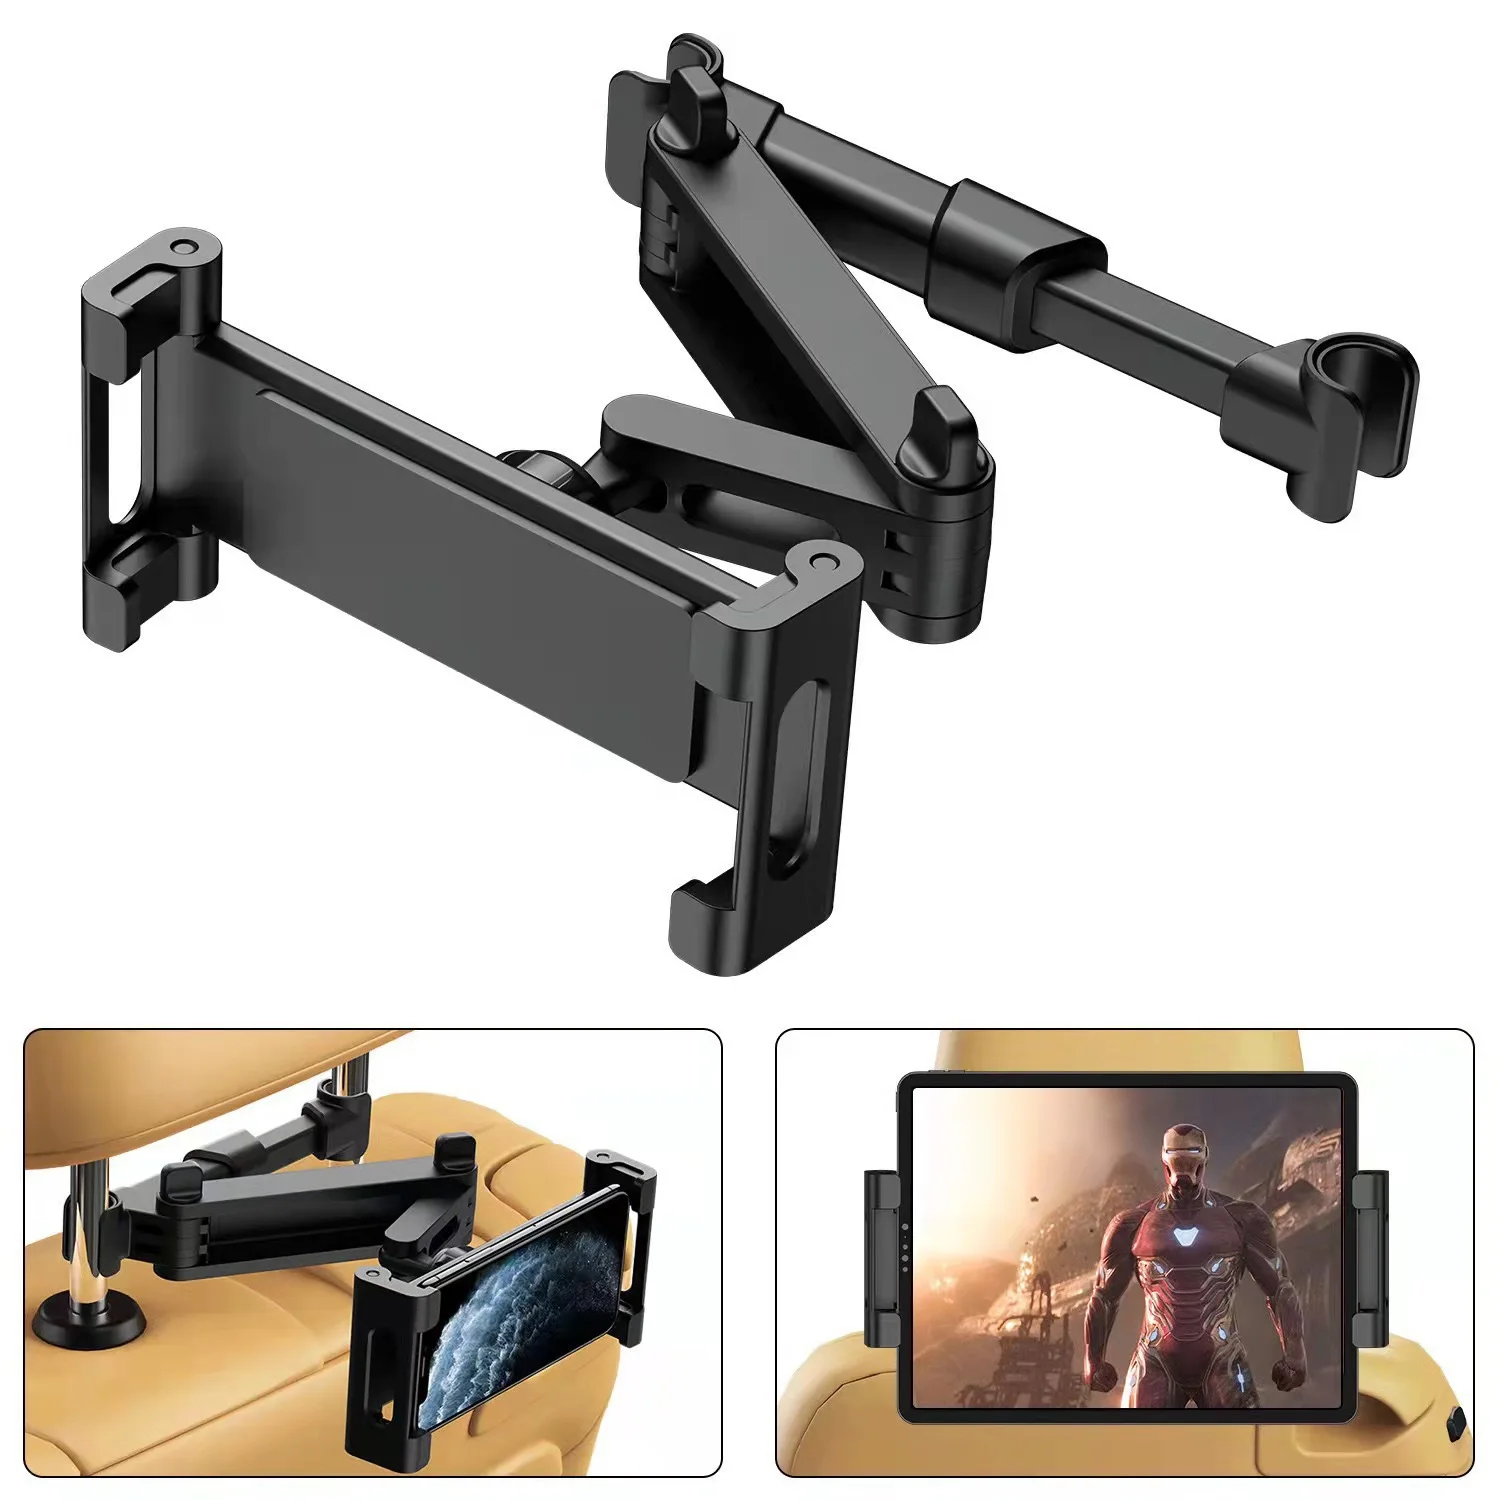 

Car mounted rear seat extendable tablet computer holder, universal drama tracking and rotatable phone holder for rear pillow